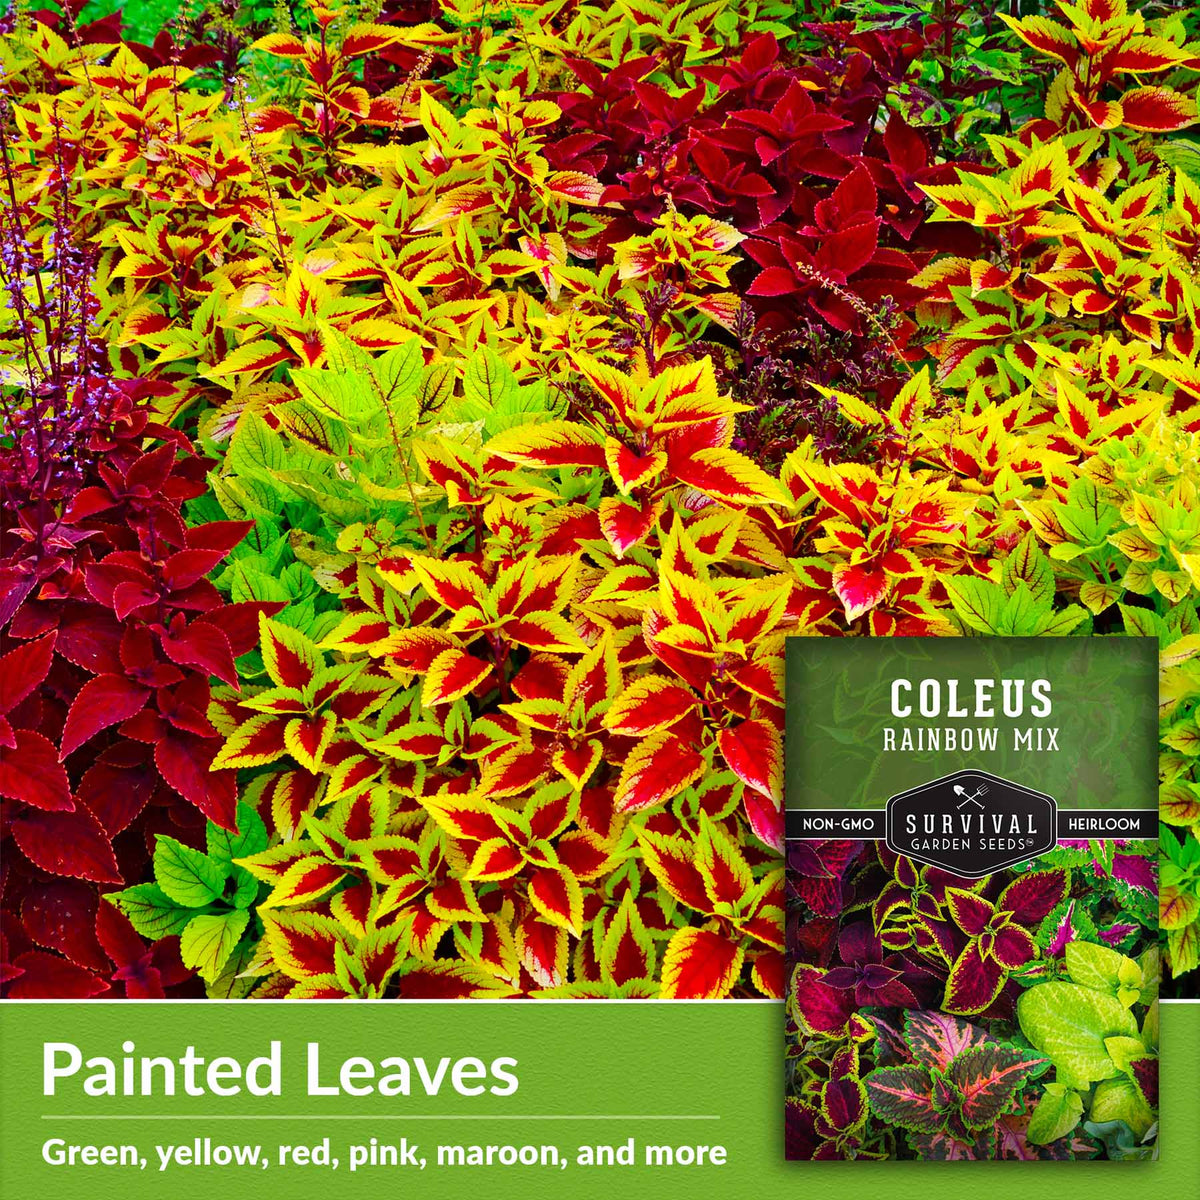 Painted leaves - green, yellow, red, pink, maroon and more